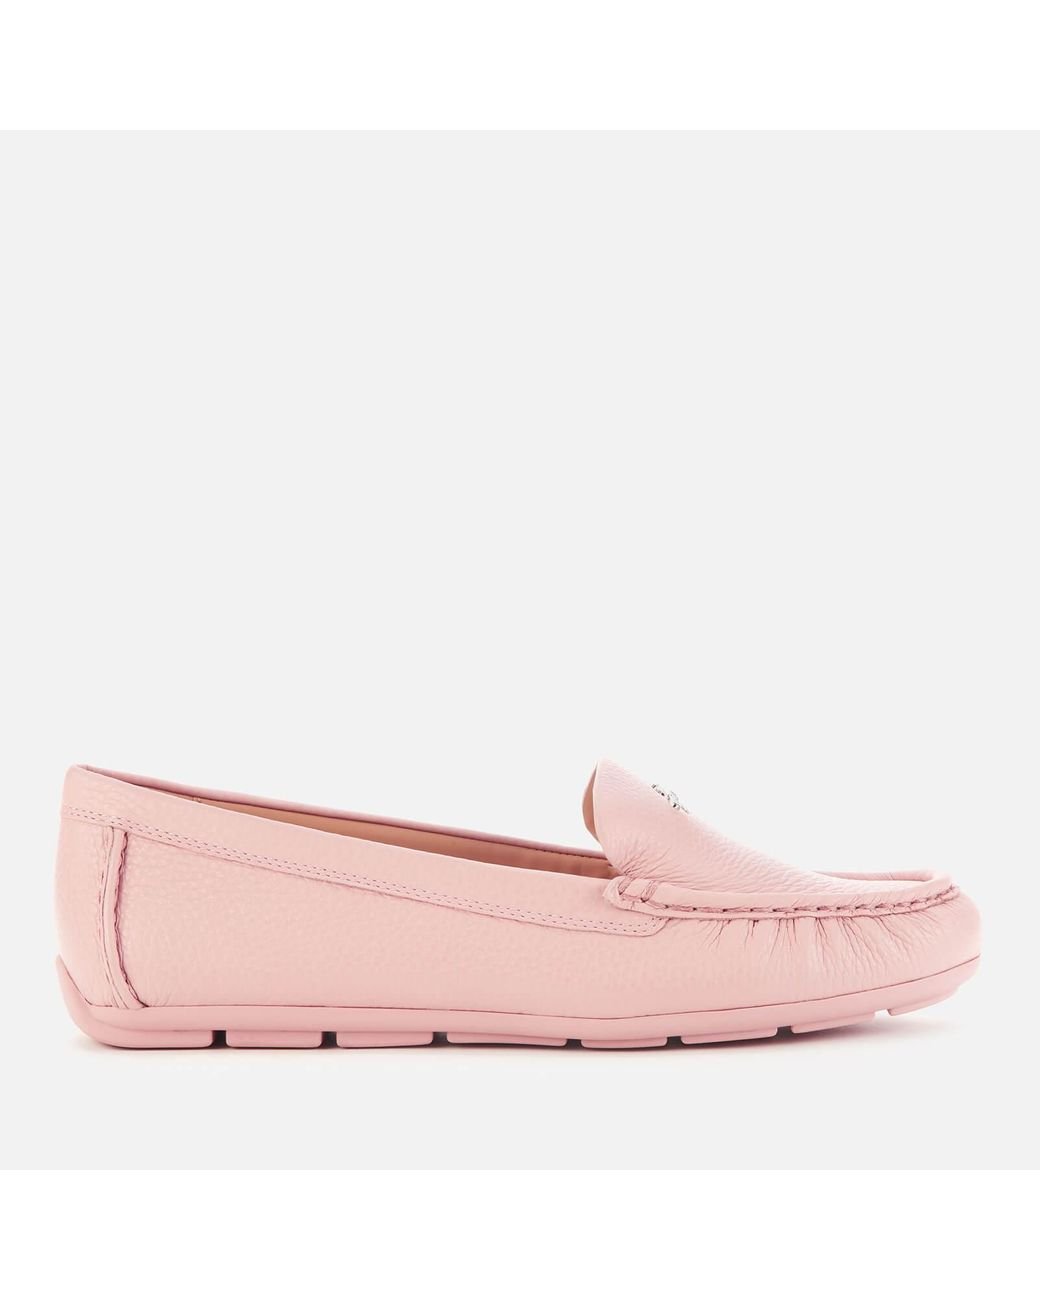 COACH Marley Leather Driver Shoes in Pink | Lyst